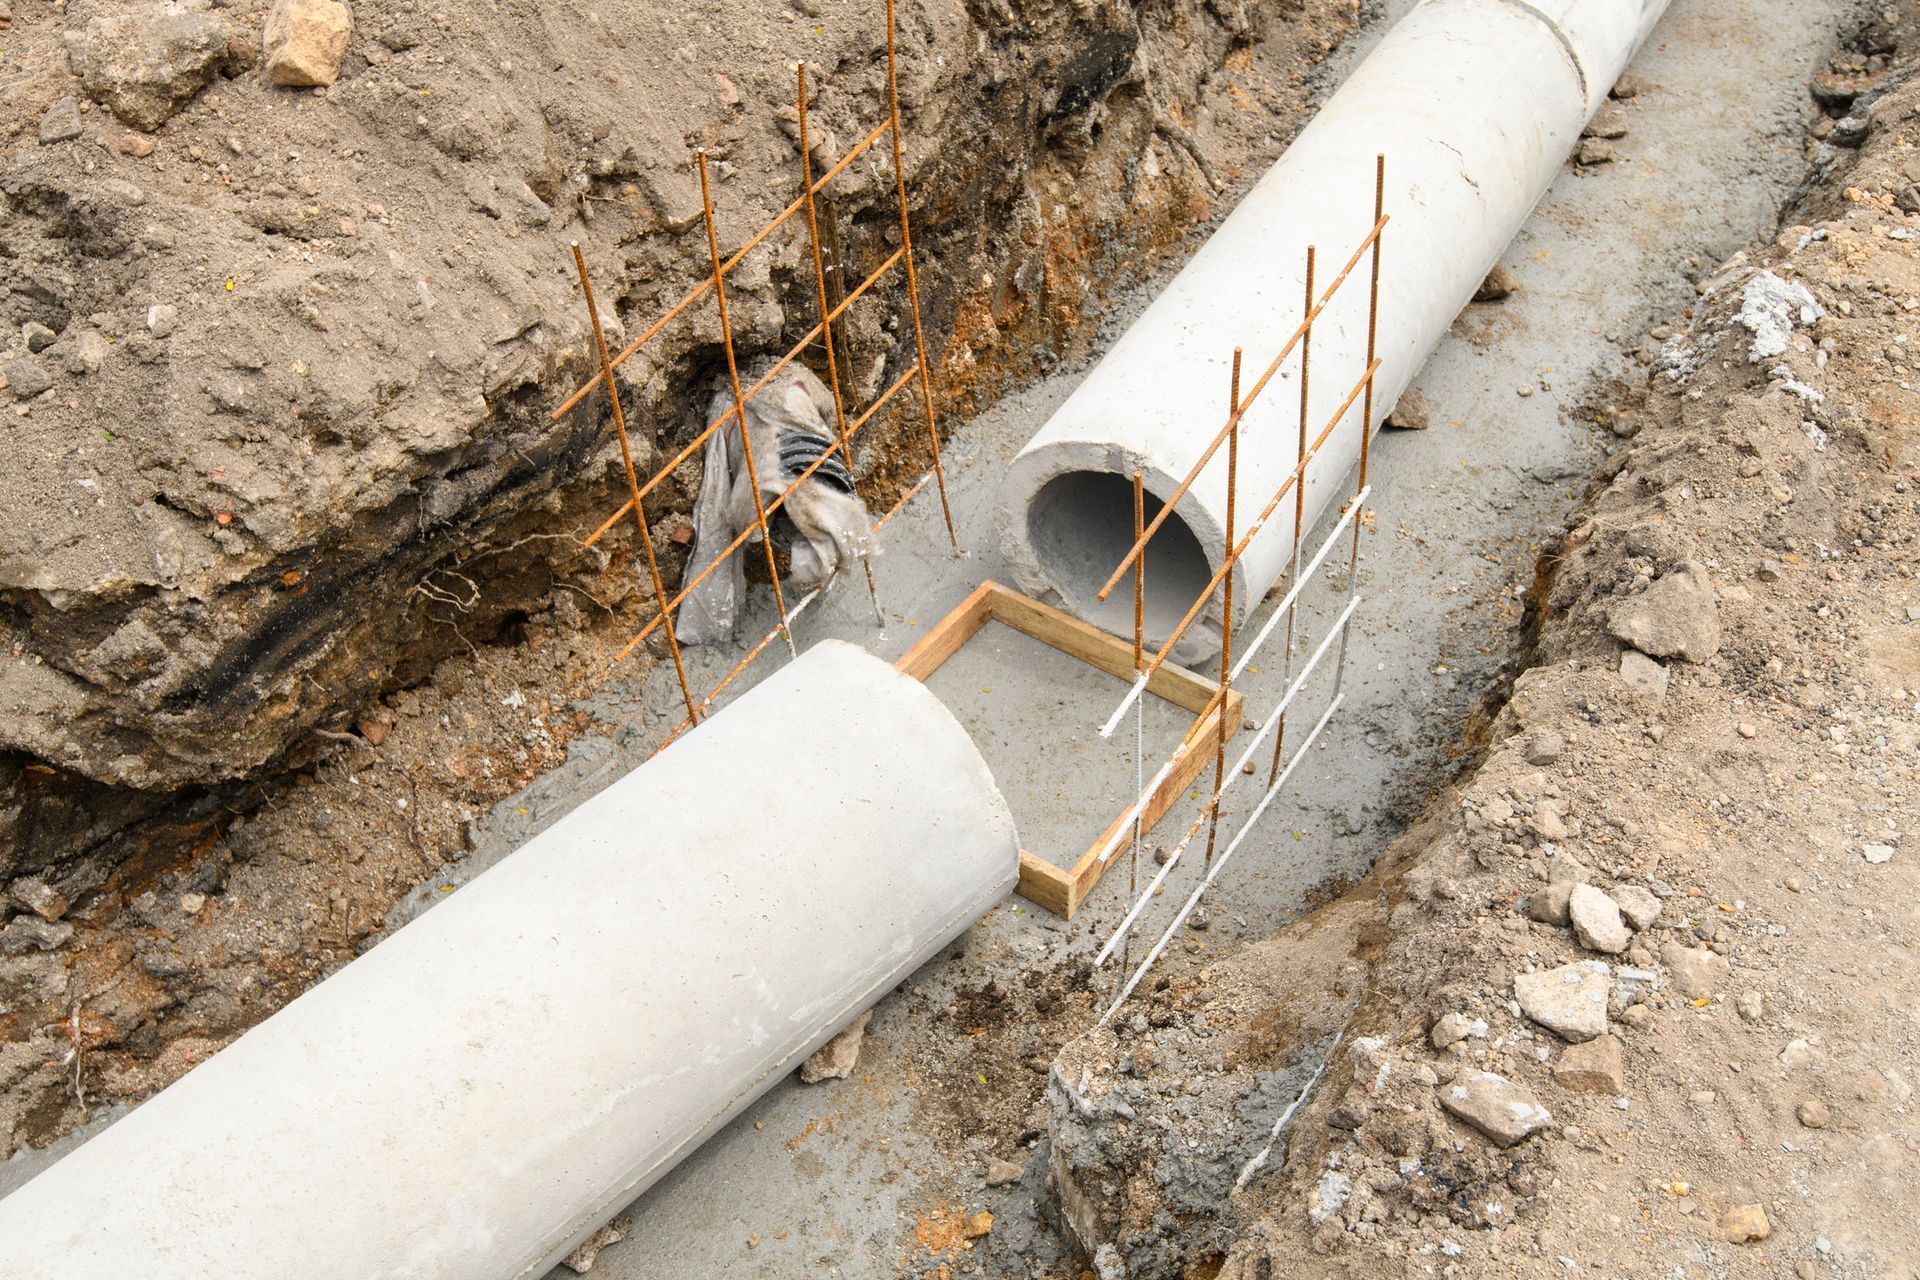 A Concrete Pipe Is Being Installed in The Dirt - Freedom, PA - Browns Outdoor Innovations